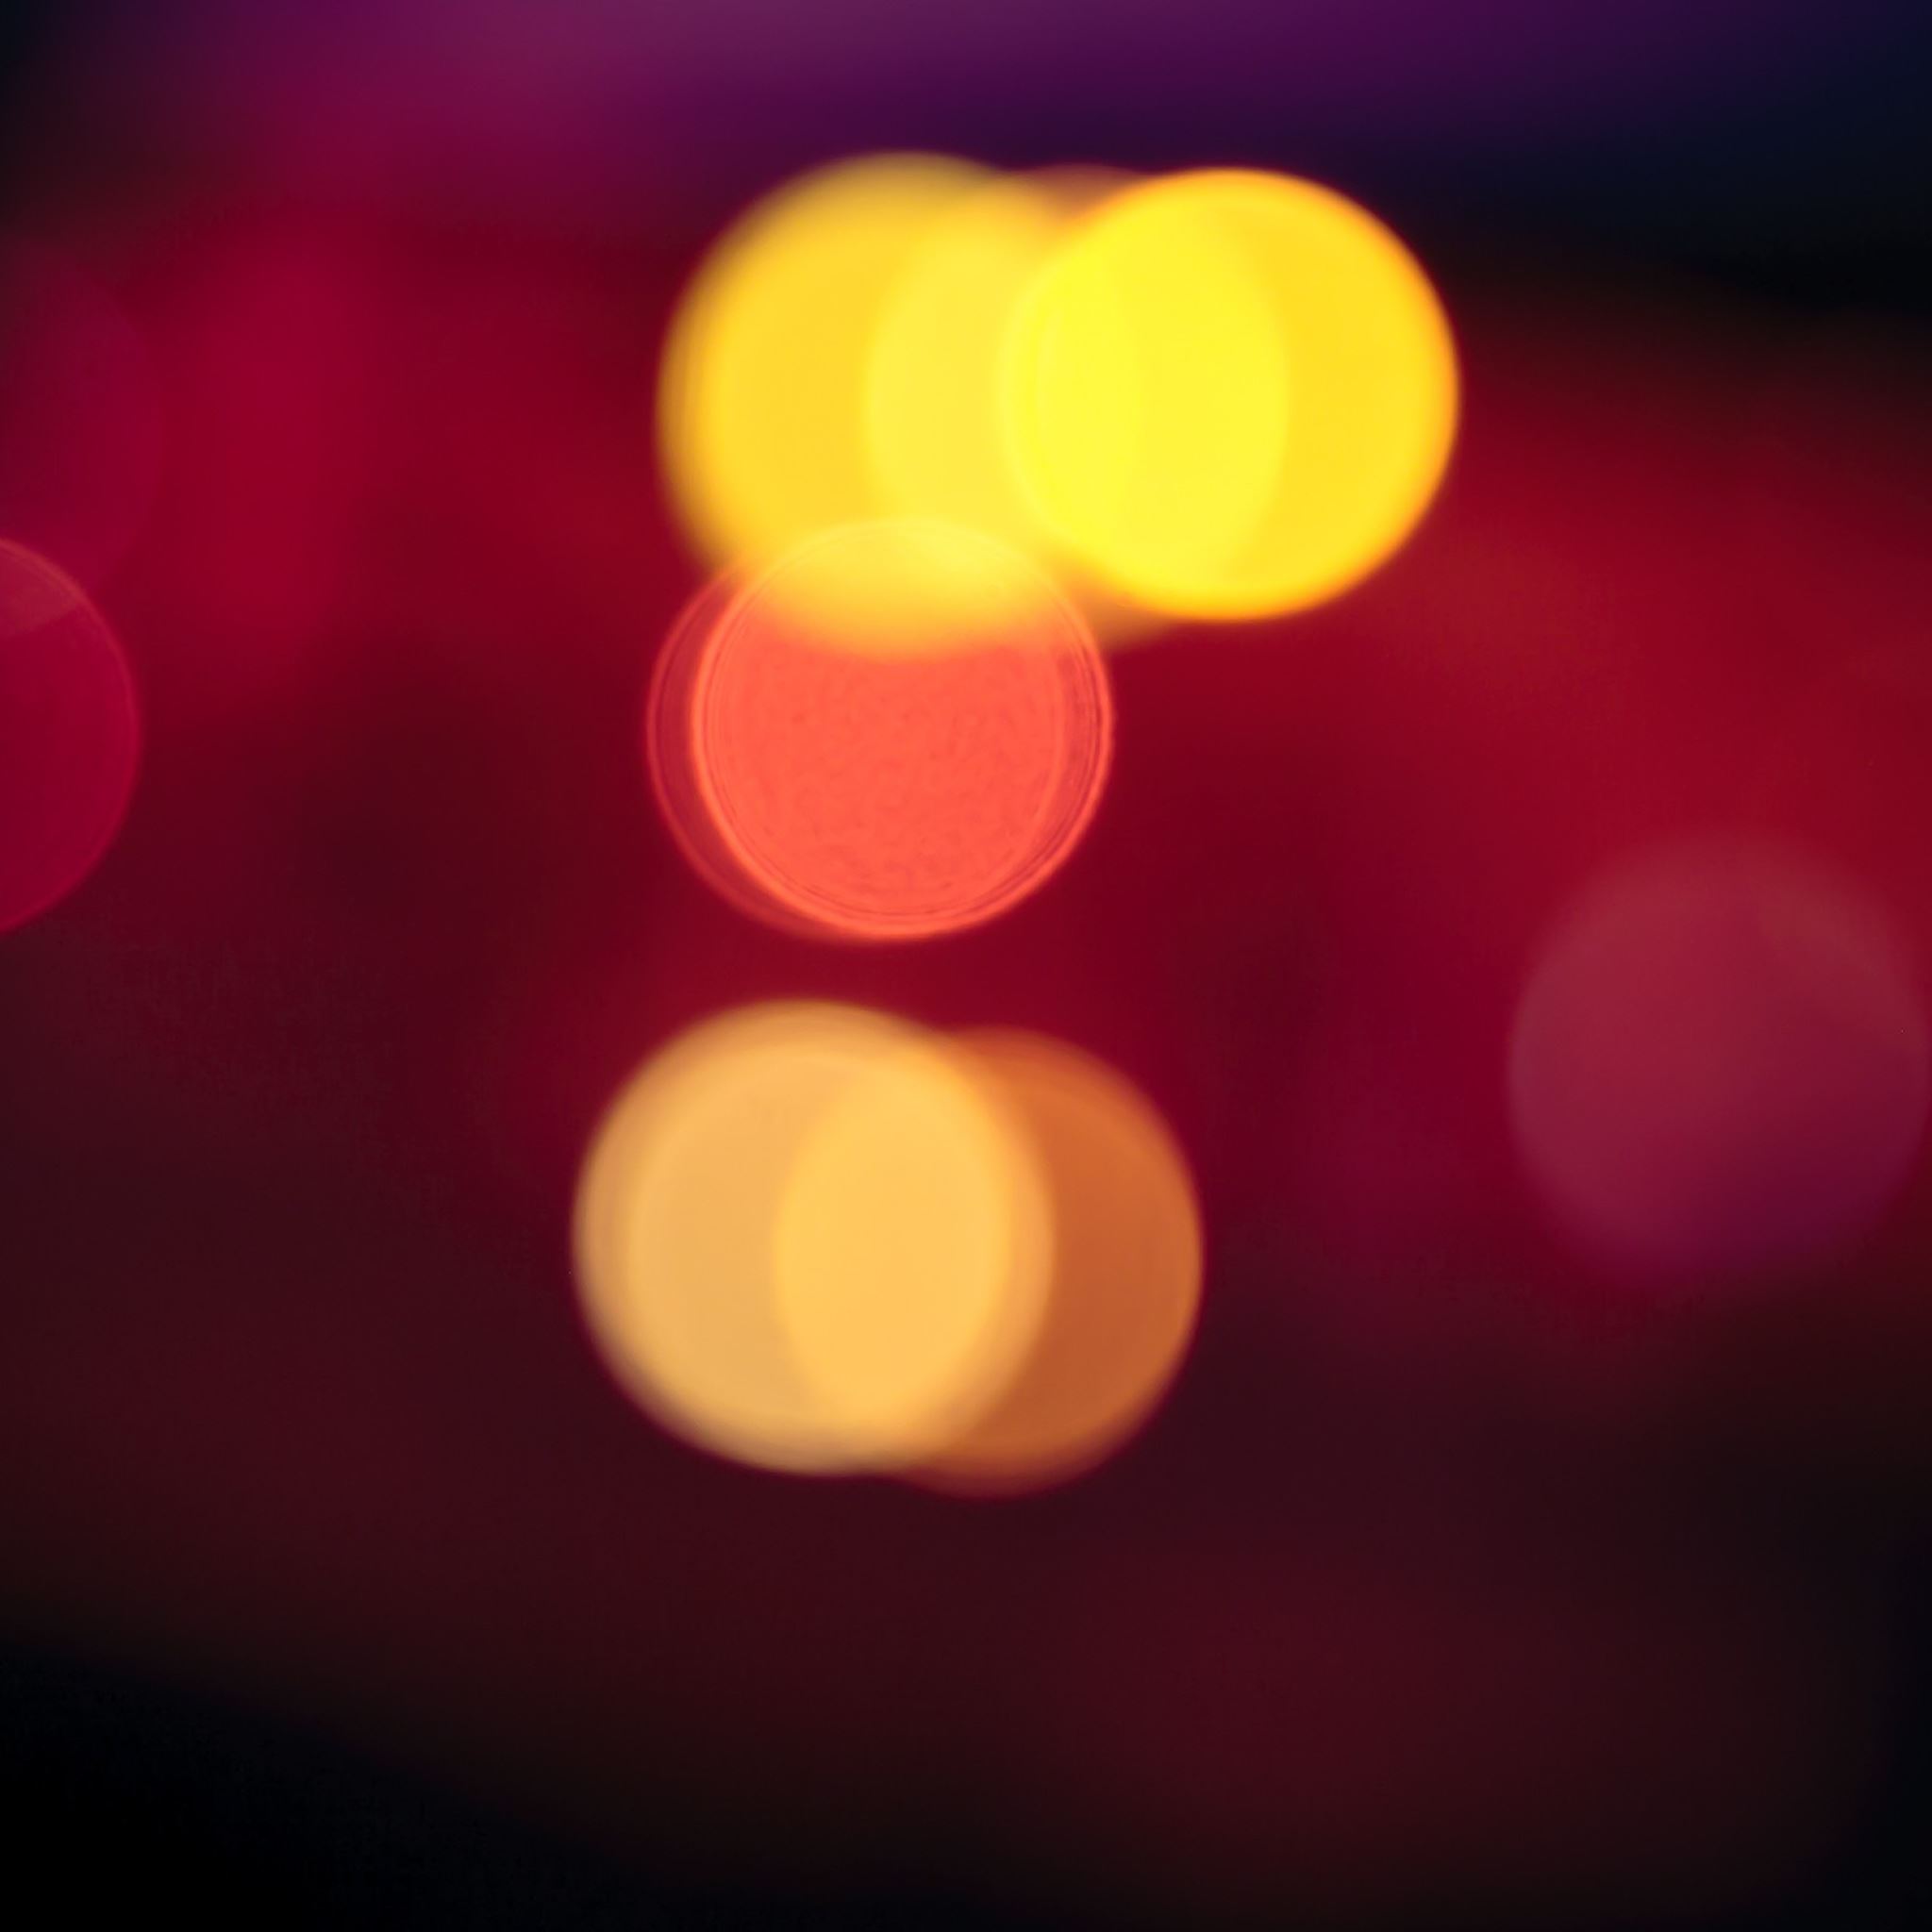 City Blur Lights iPad Air Wallpapers Free Download